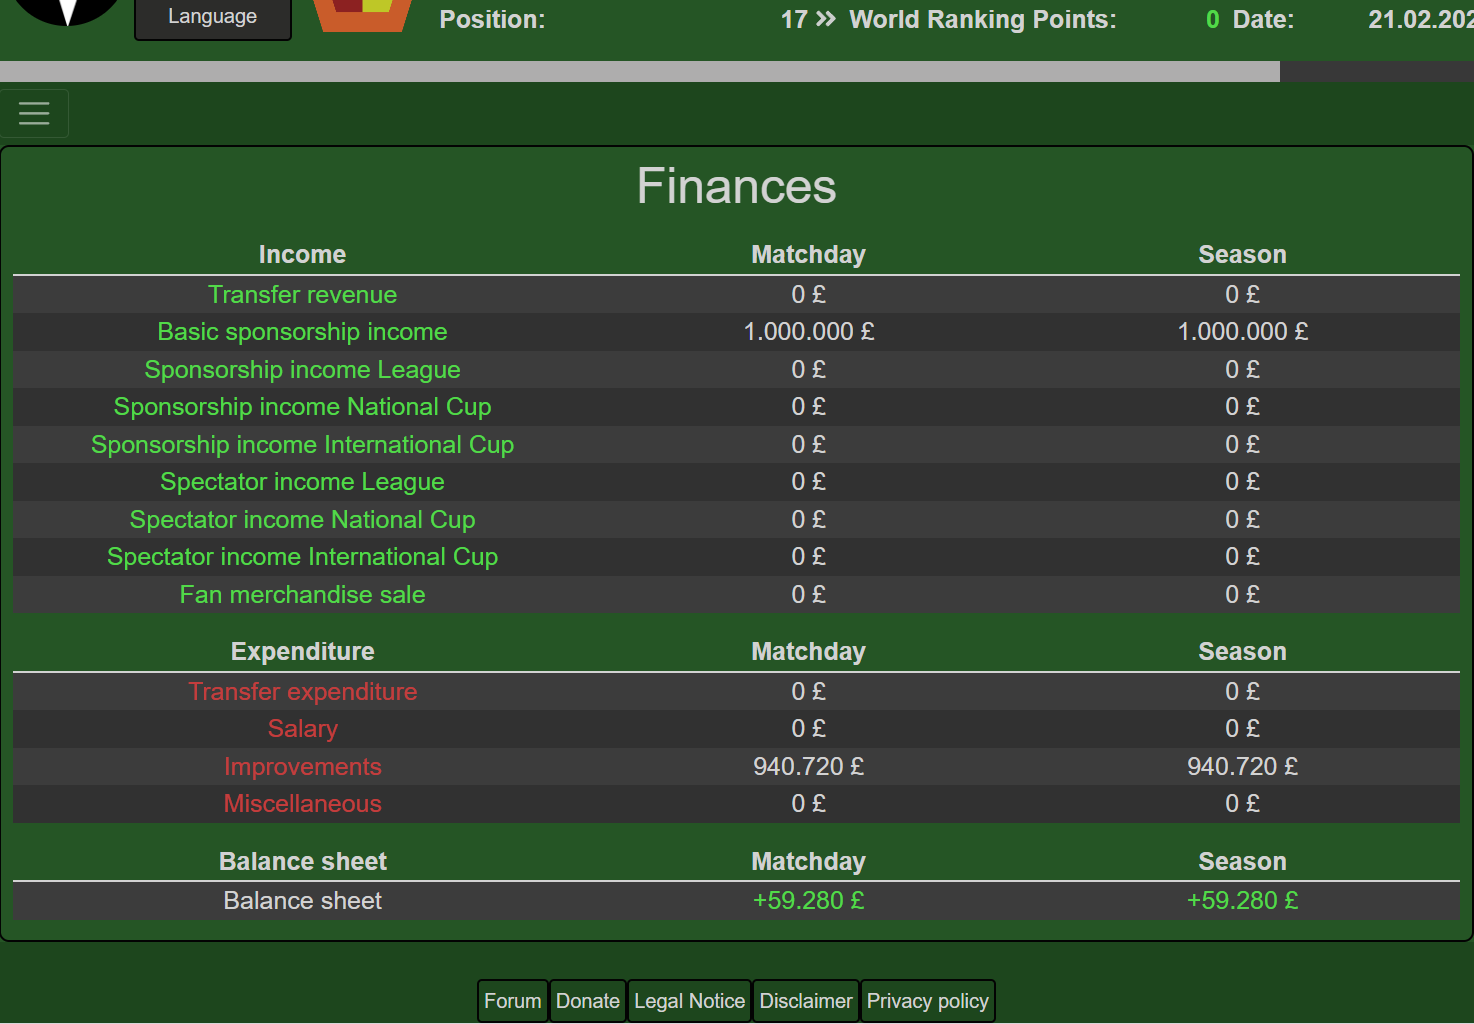 Finance overview